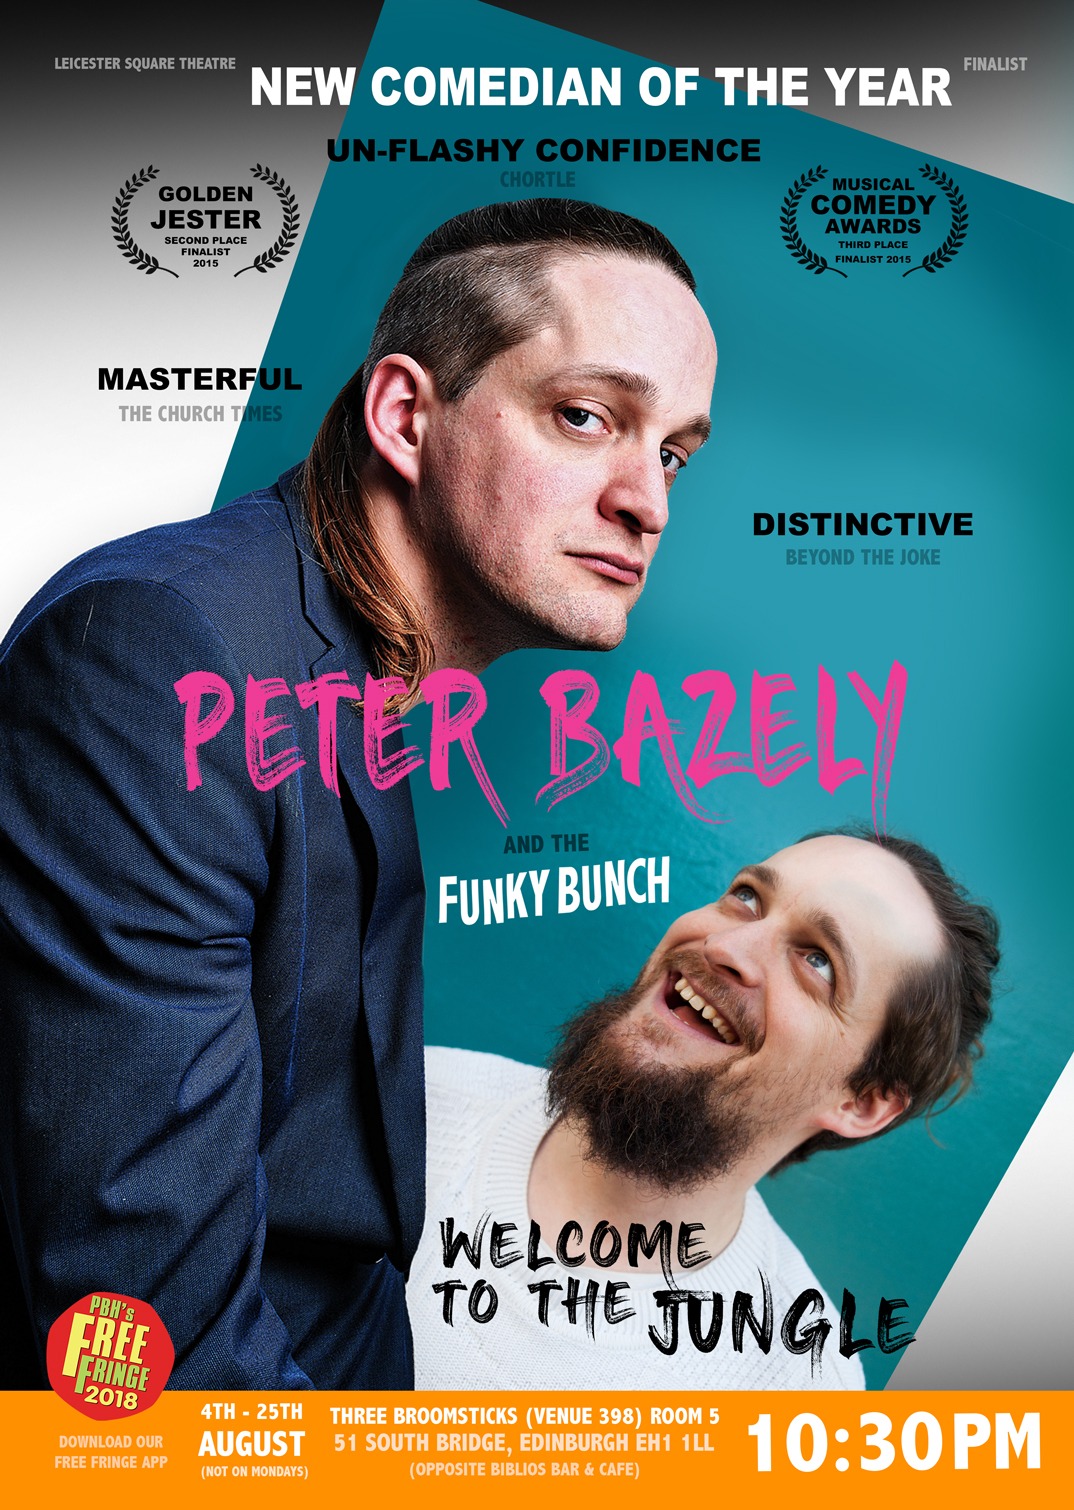 The poster for Peter Bazely and the Funky Bunch: Welcome to the Jungle